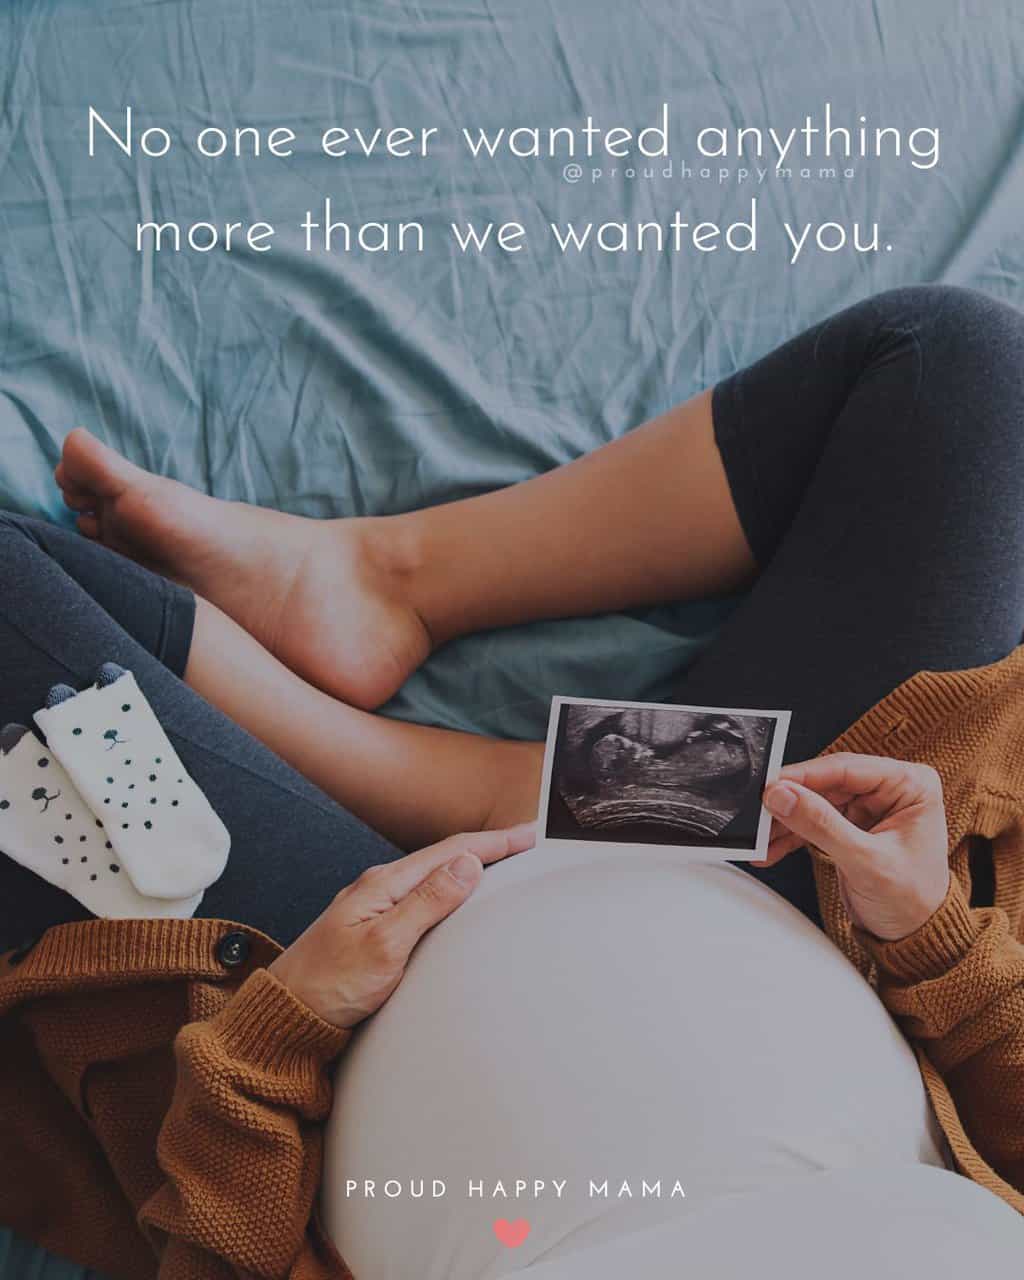 Pregnancy blessing quotes - 'No one ever wanted anything more than we wanted you.'